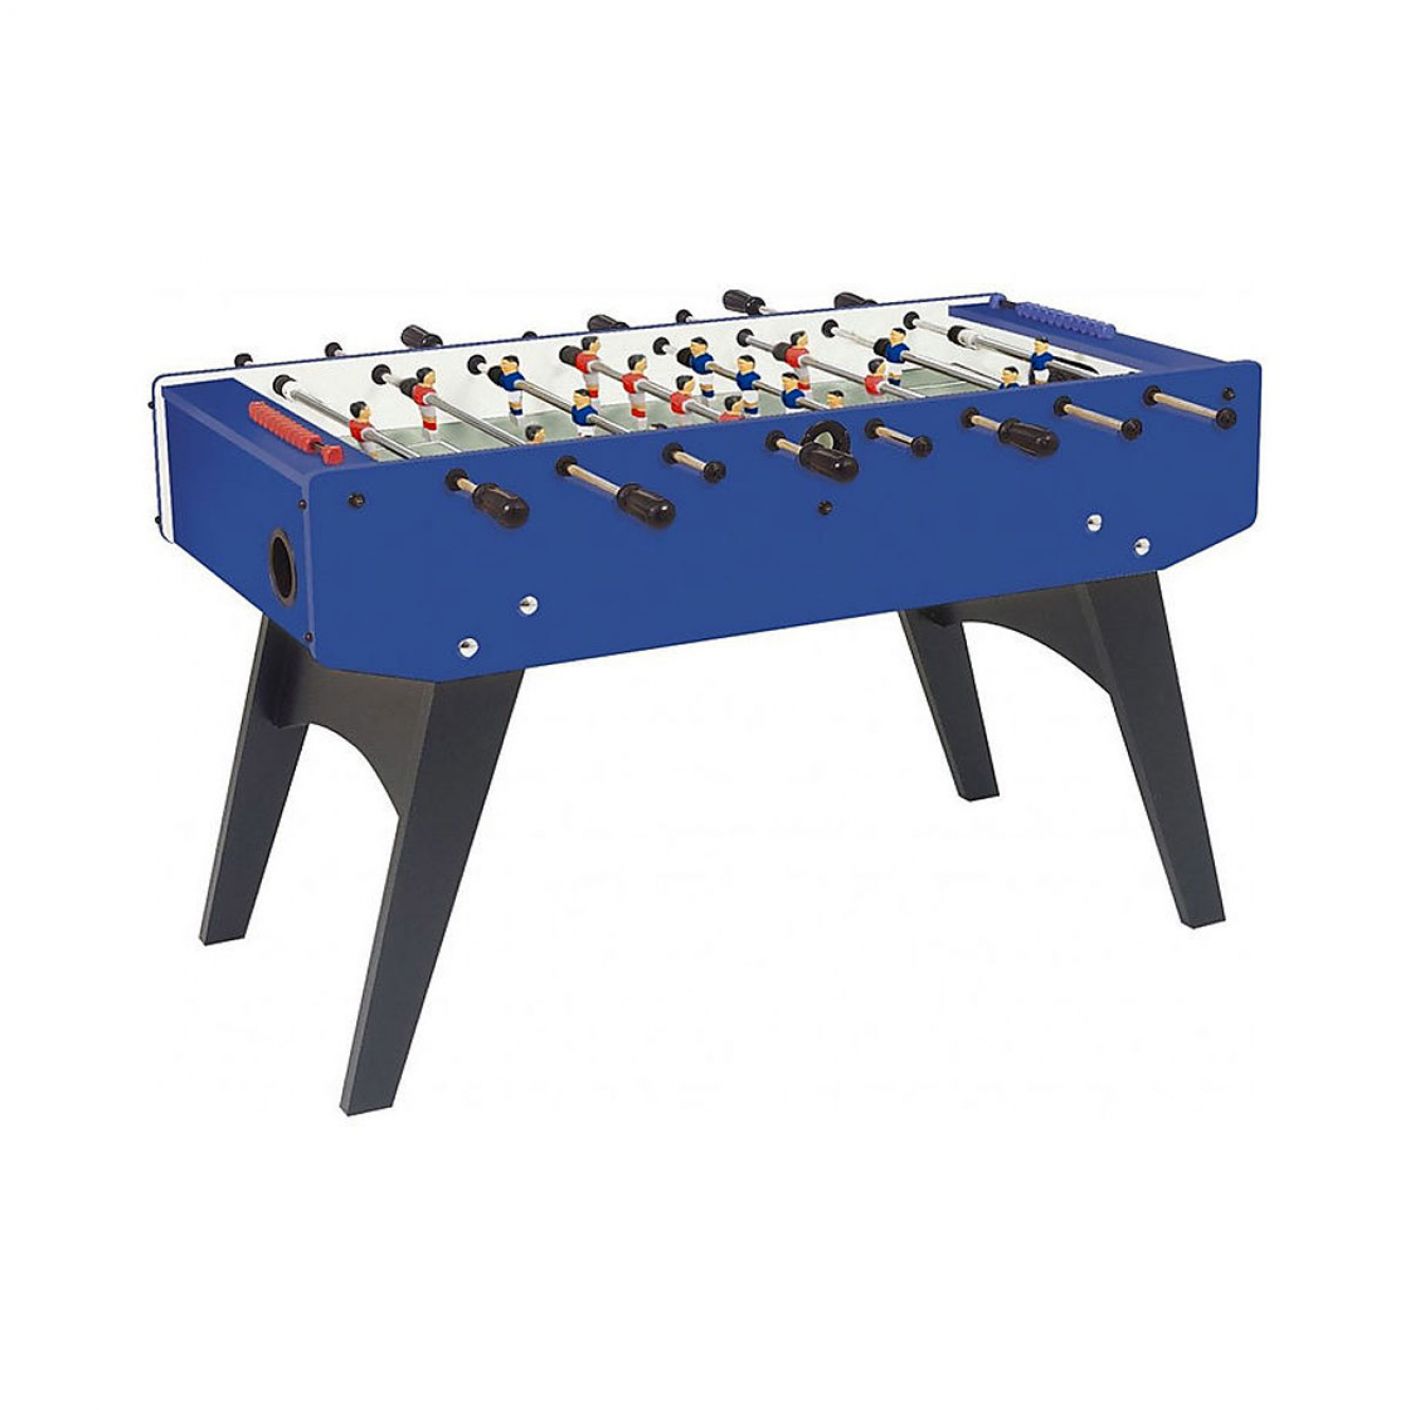 Garlando Football Table F-20 blue with outgoing rods, folding legs